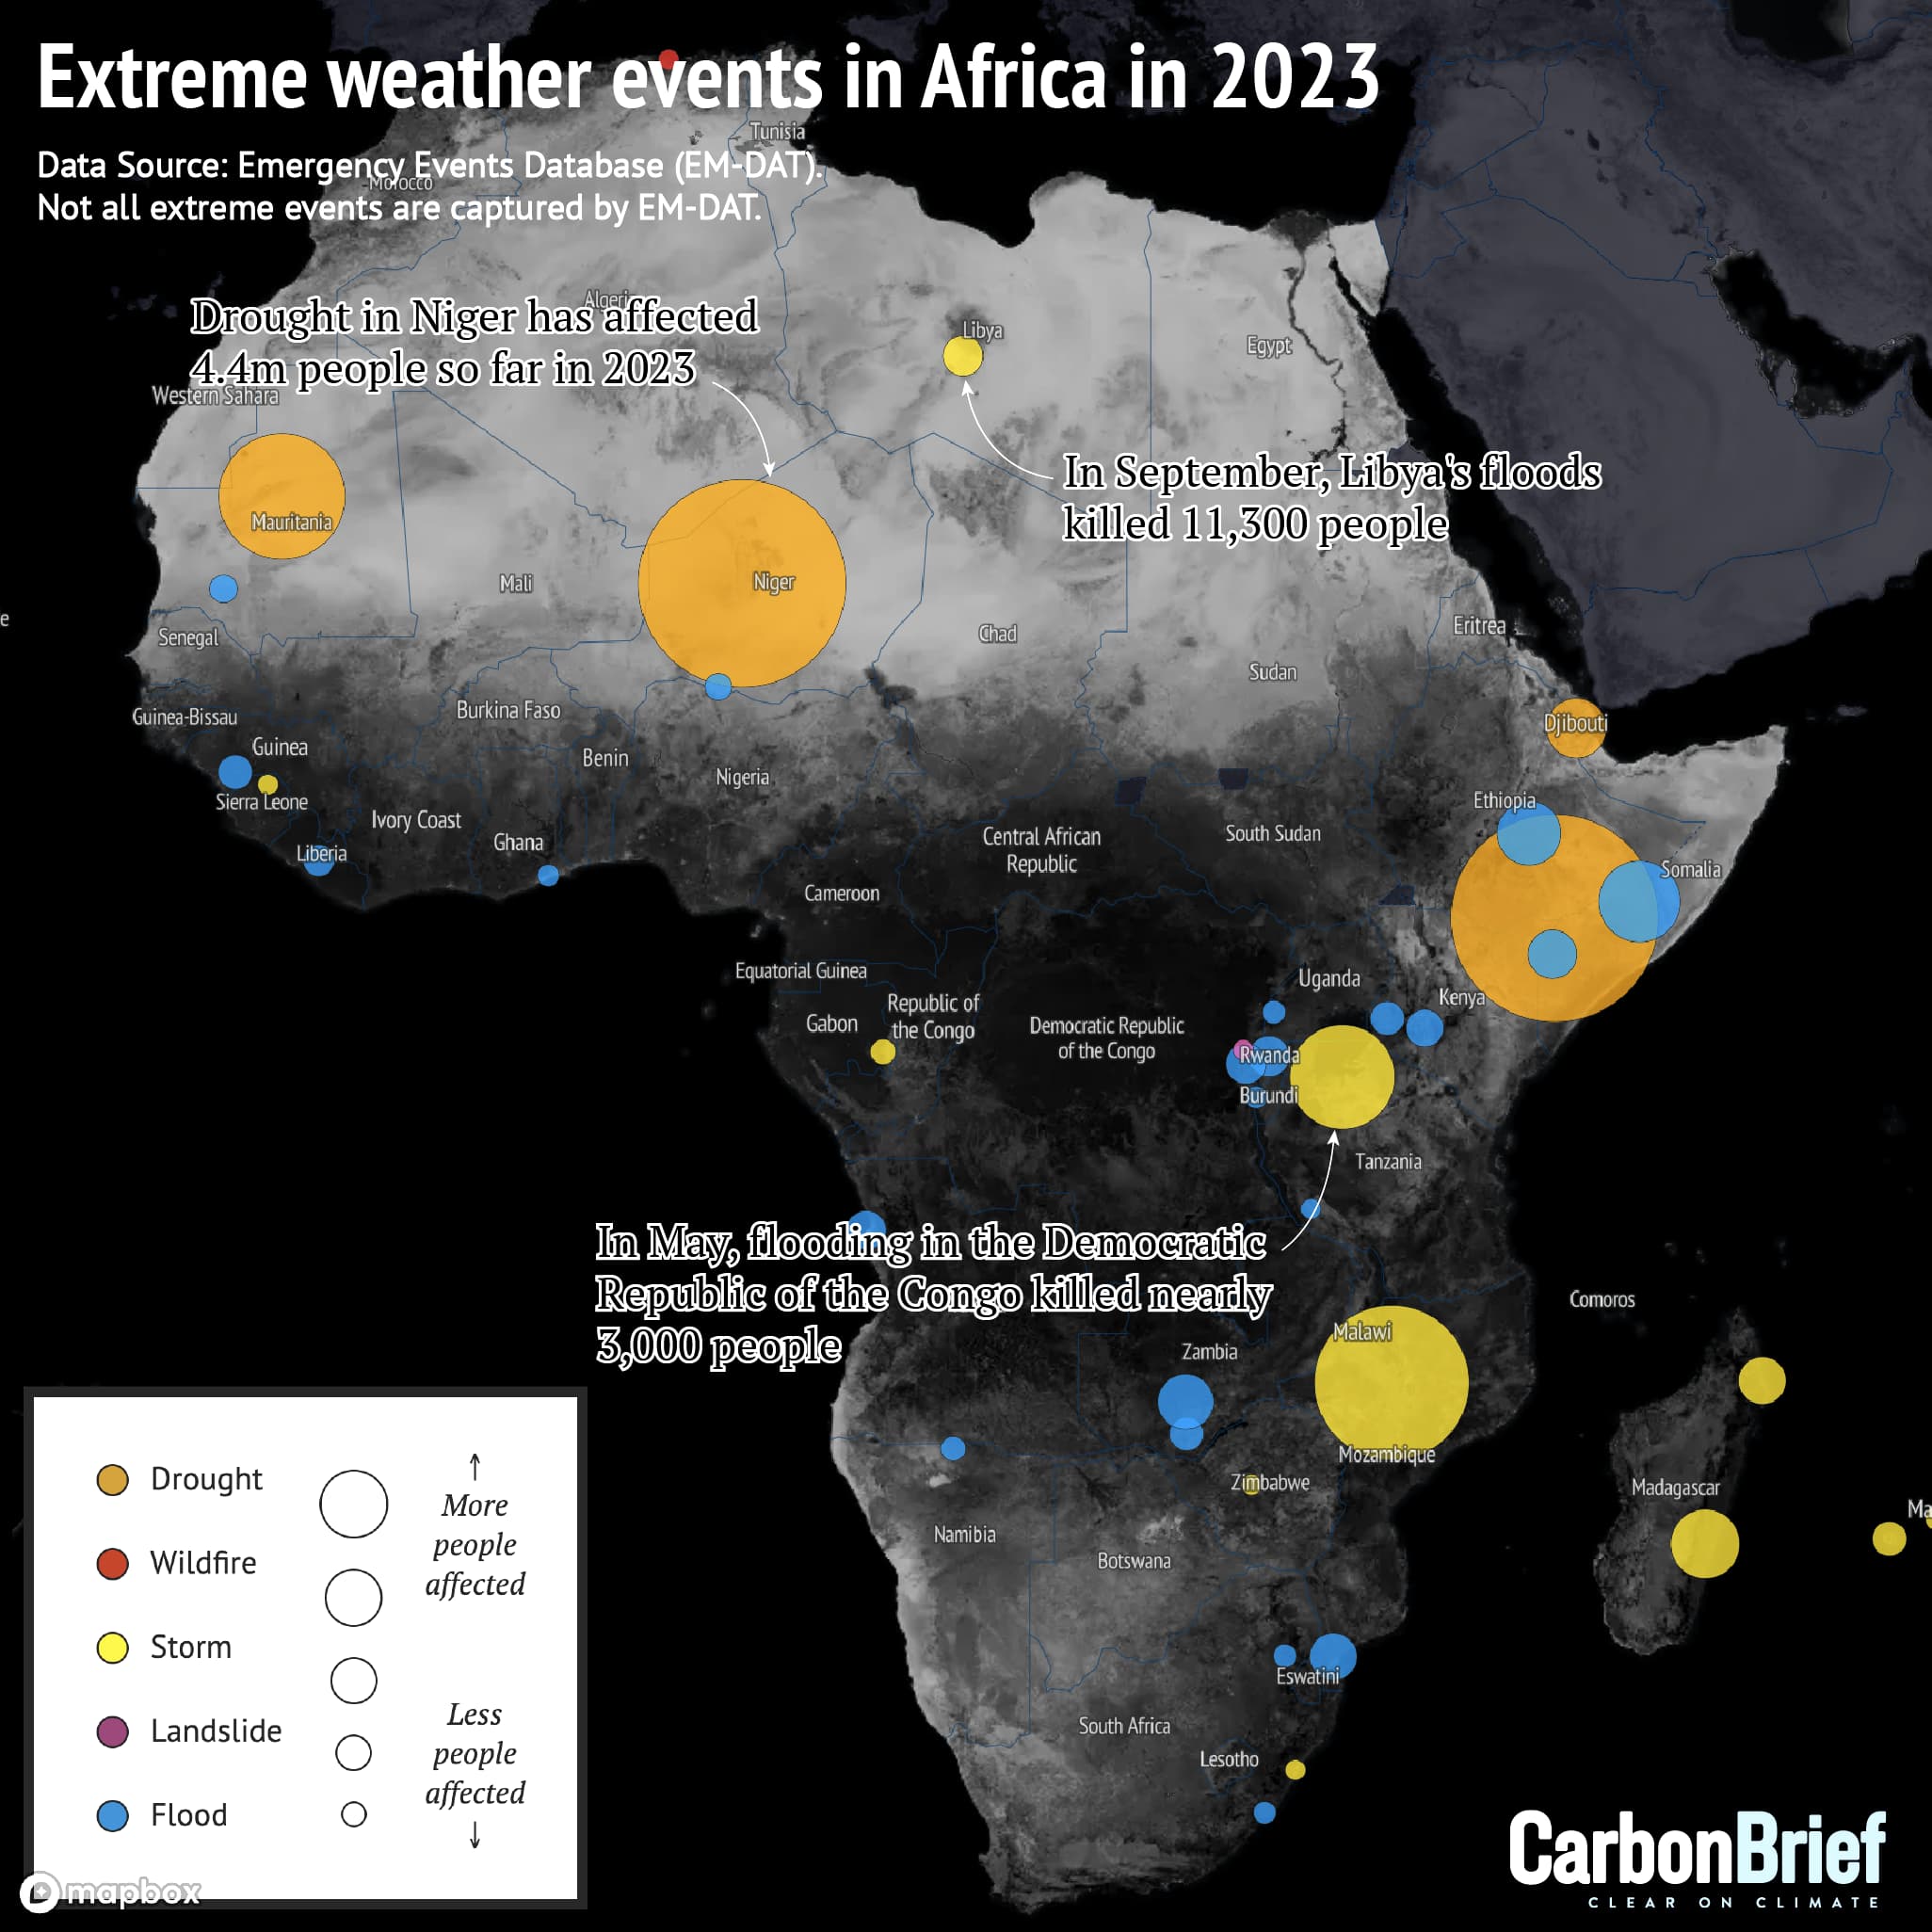 Extreme weather events in Africa in January-October 2023.